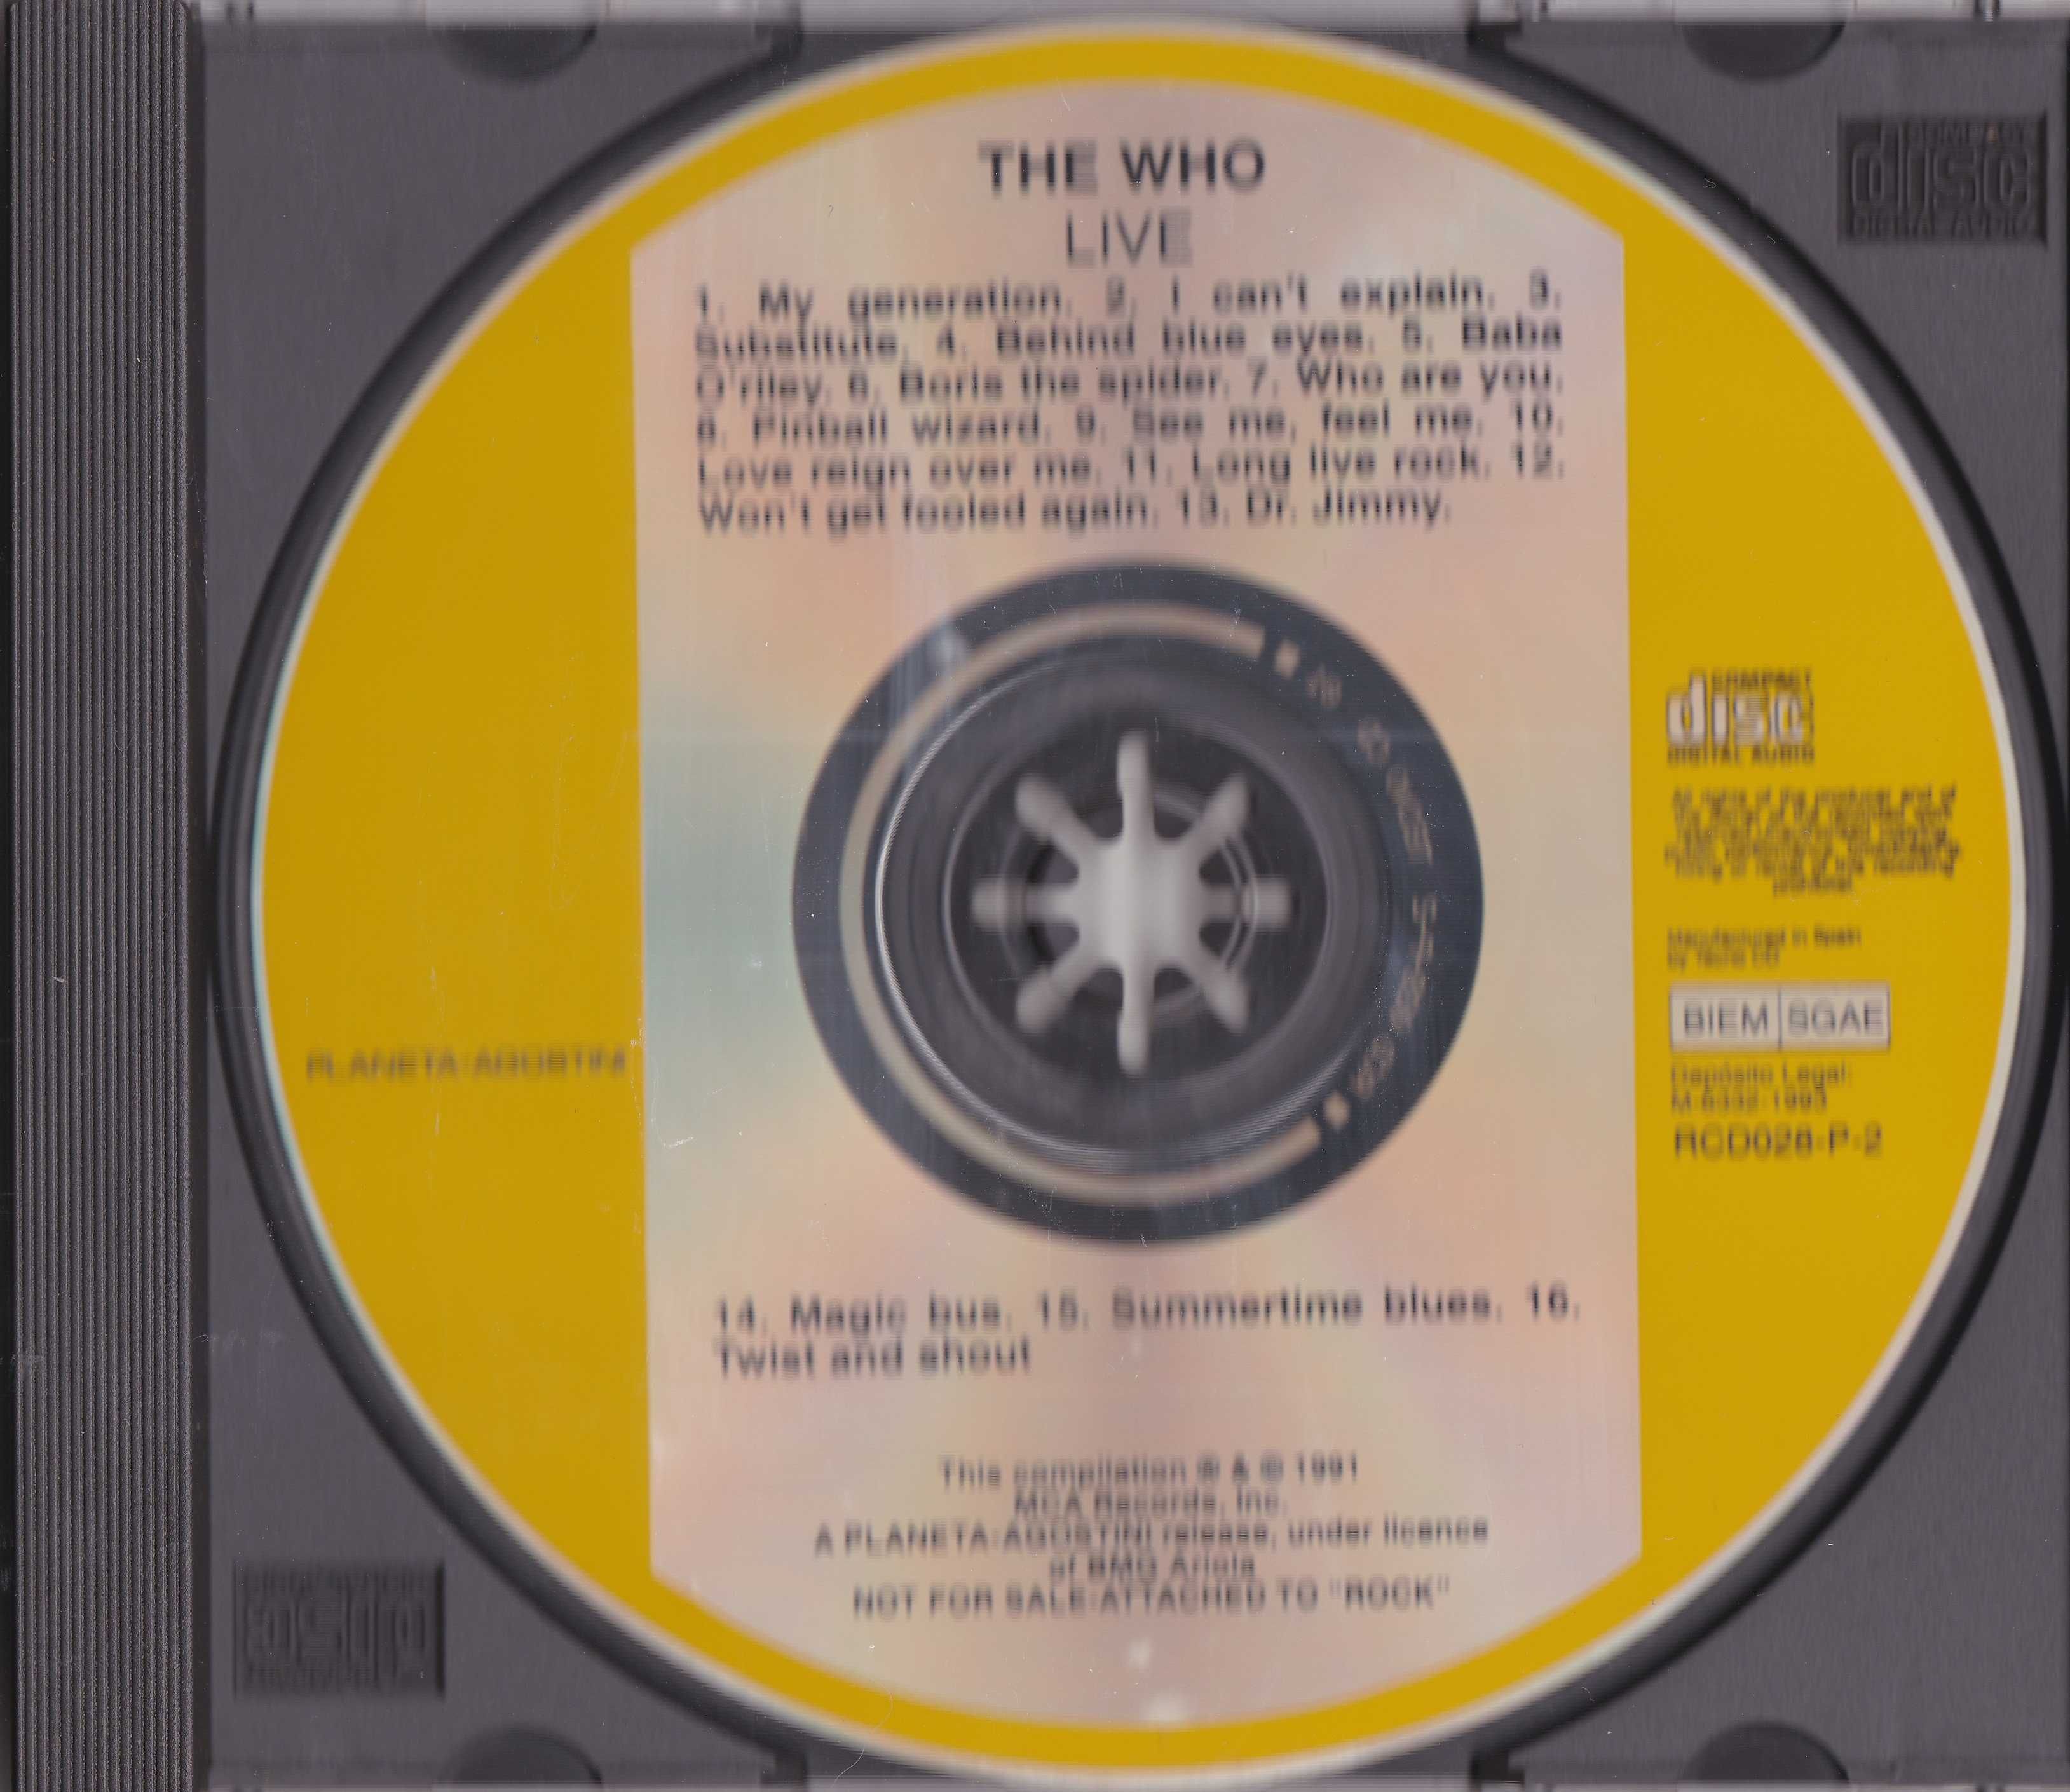 The Who – The  Collection - The Who Live